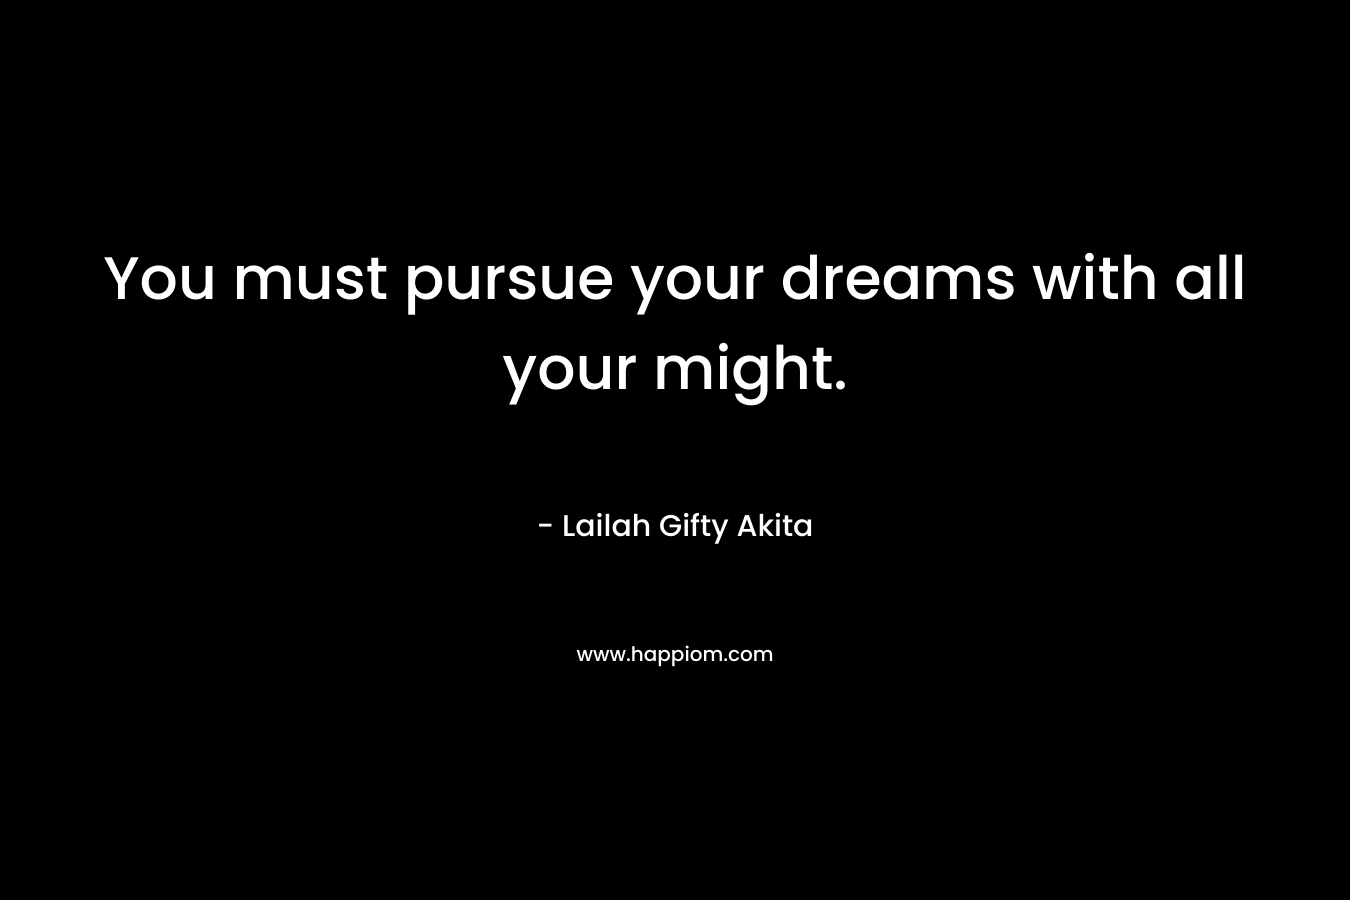 You must pursue your dreams with all your might.